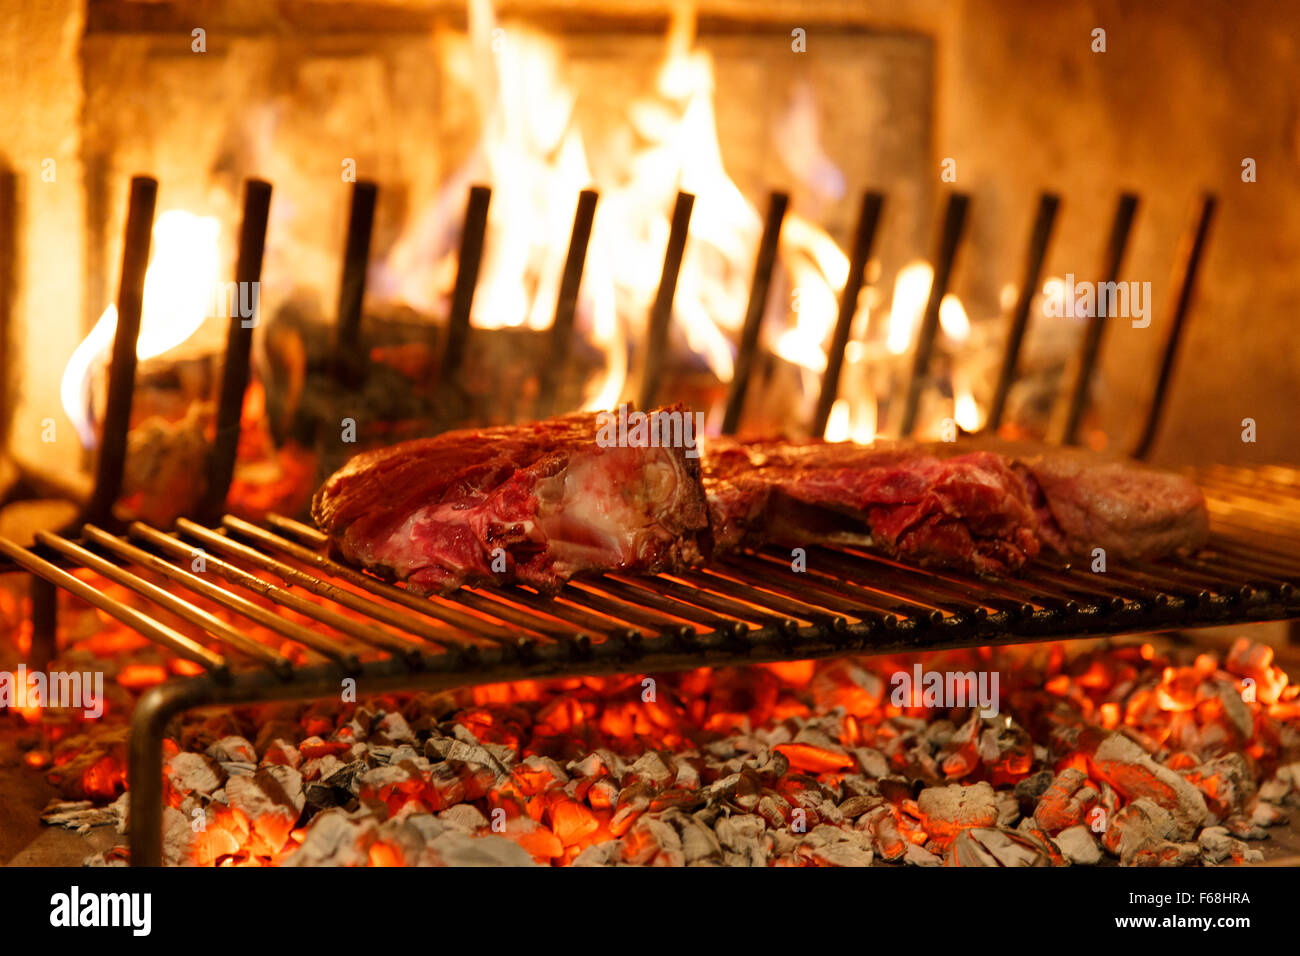 A top sirloin steak flame broiled on a barbecue, shallow depth of field. Stock Photo